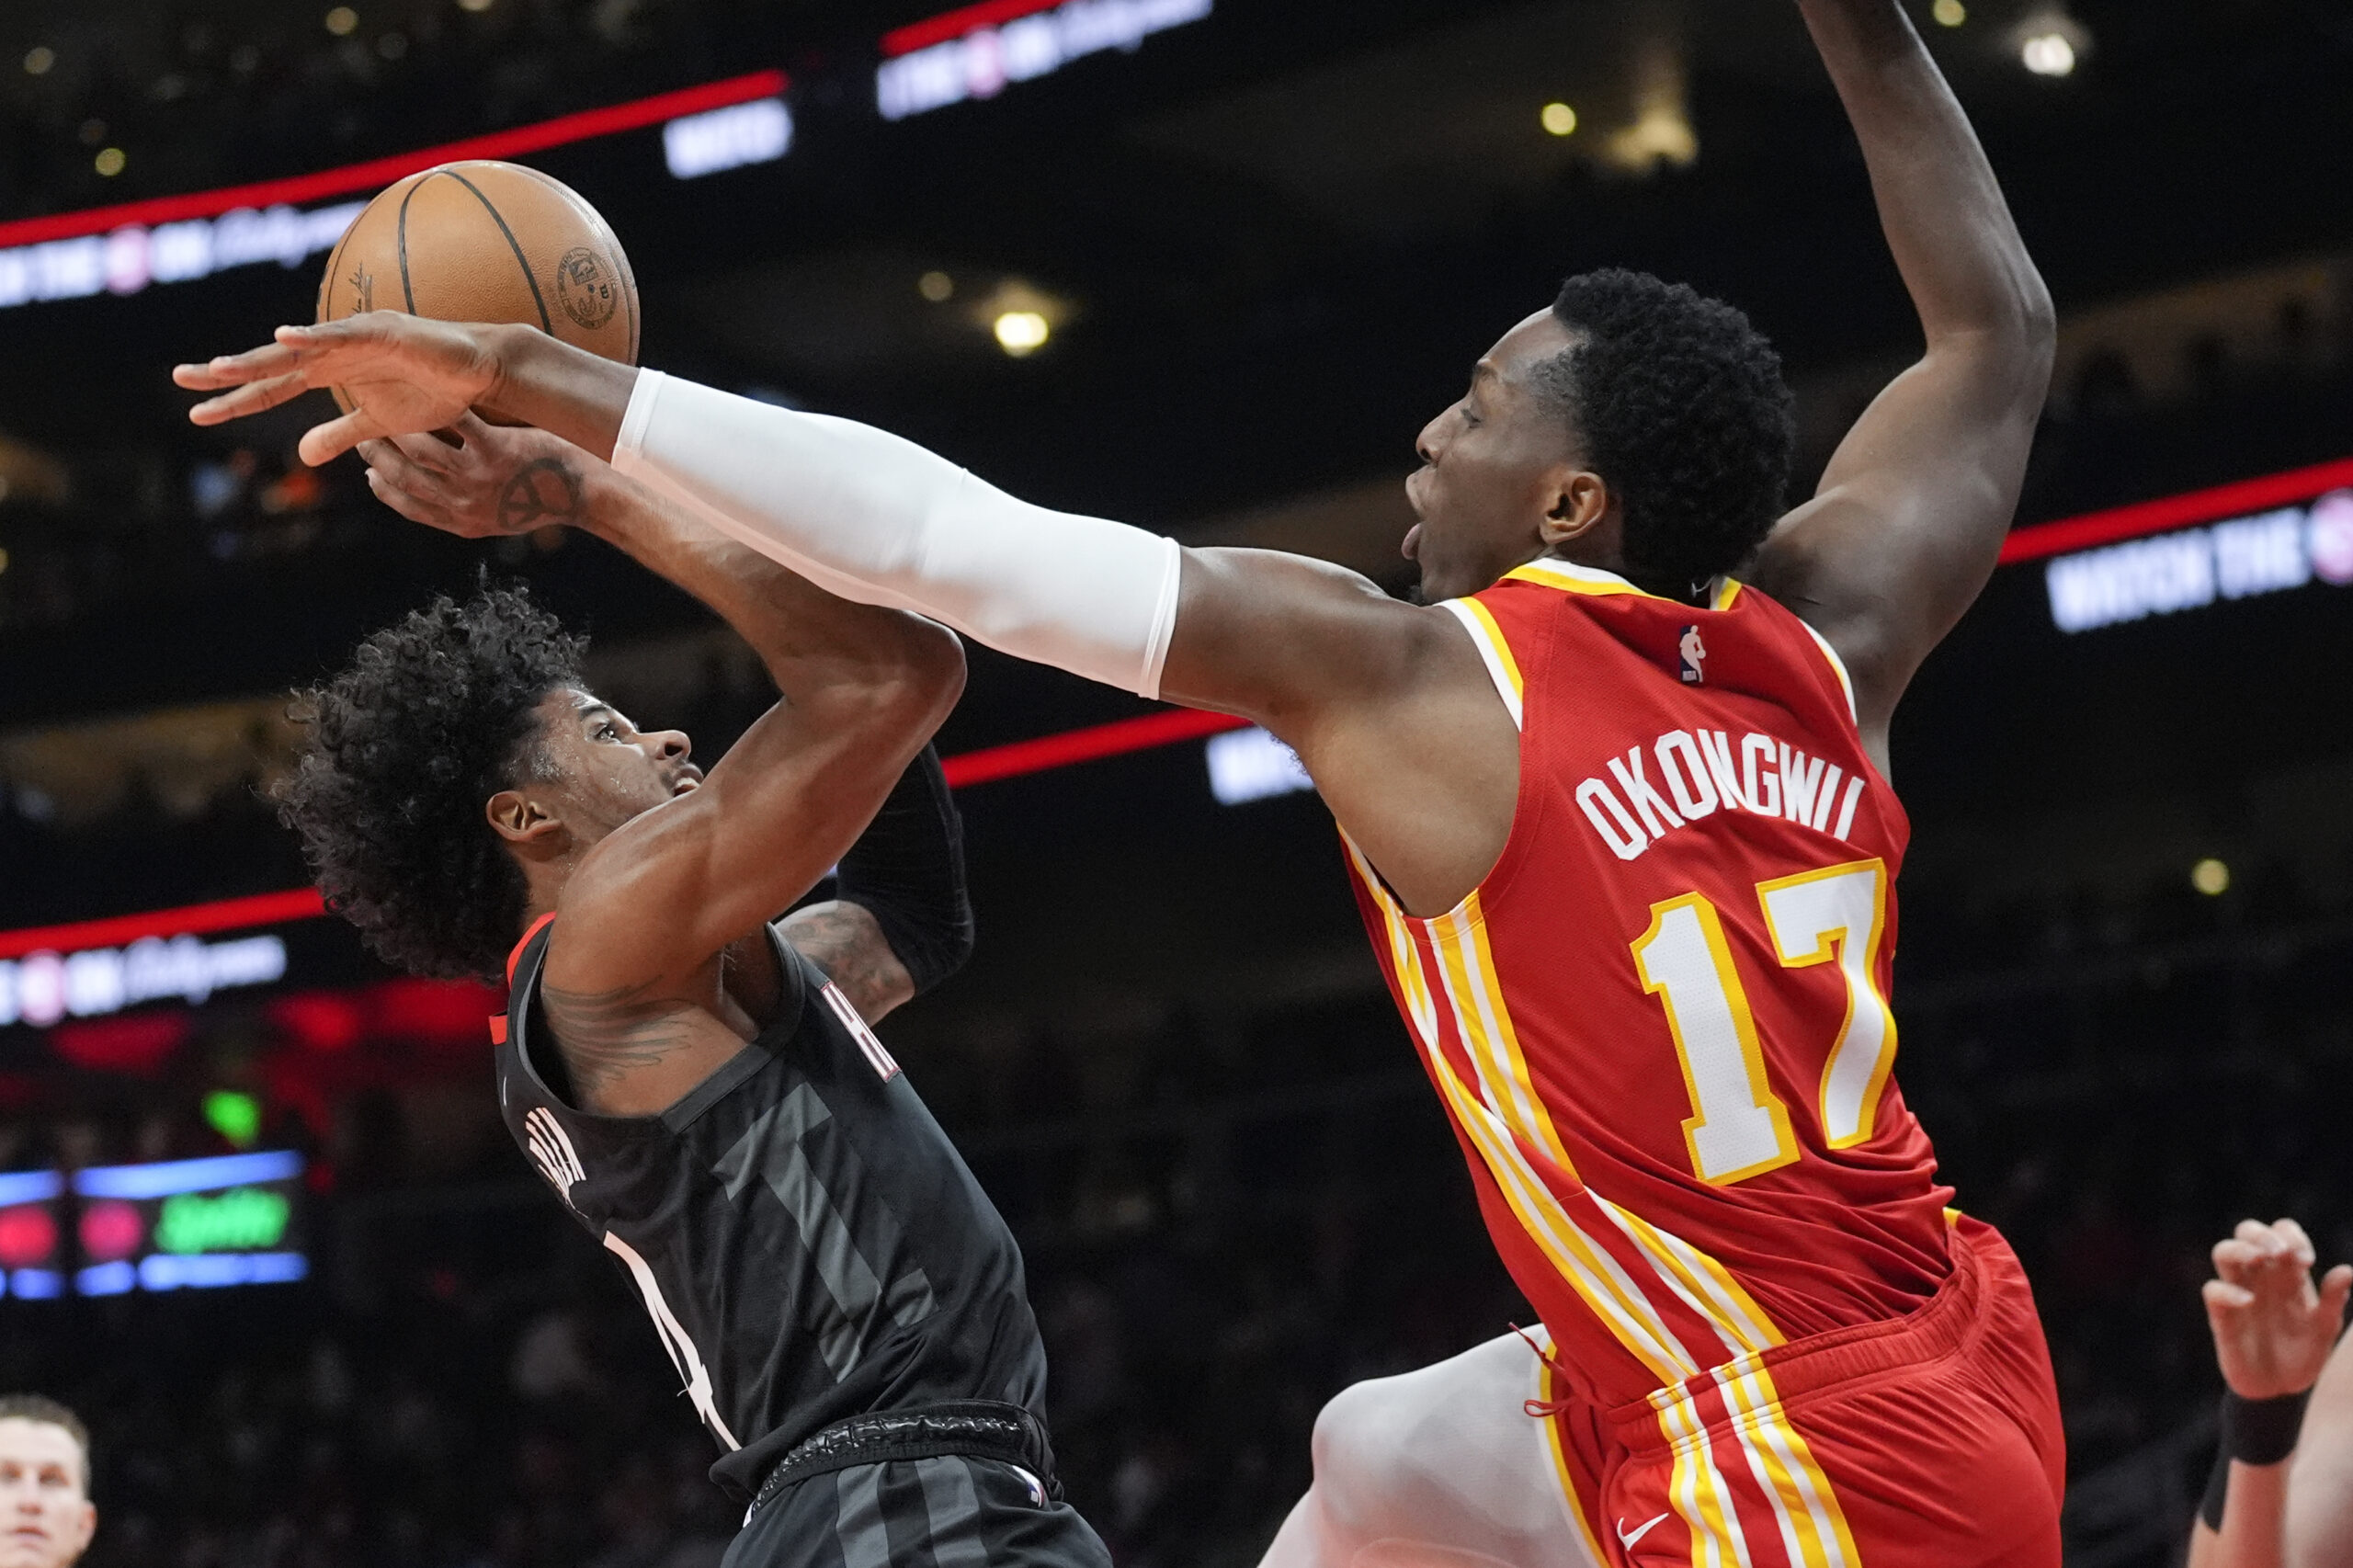 Atlanta Hawks' front-line depth takes another hit with Okongwu out